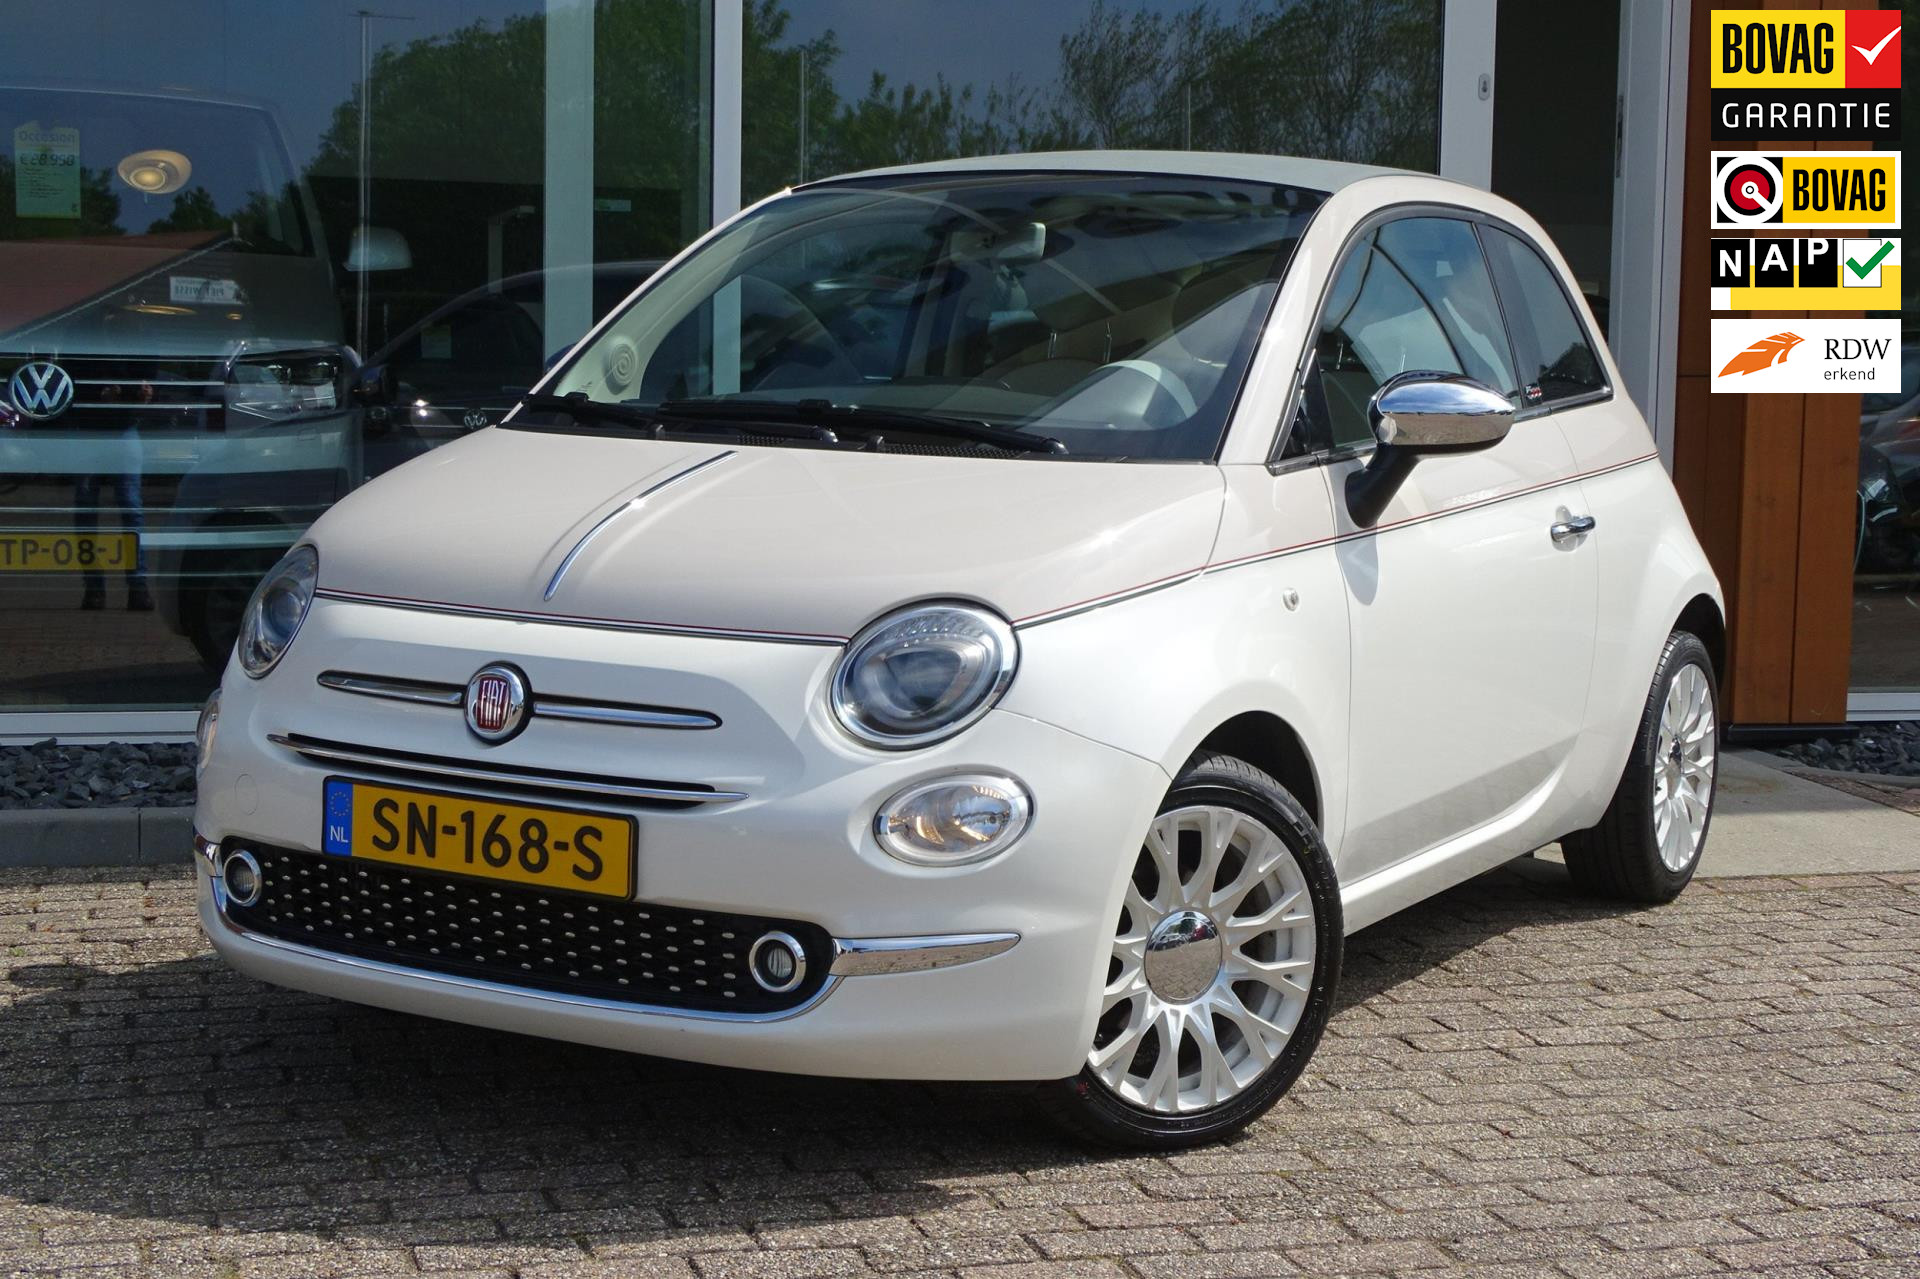 Fiat 500 C 0.9 TwinAir Turbo Forever Young bij viaBOVAG.nl